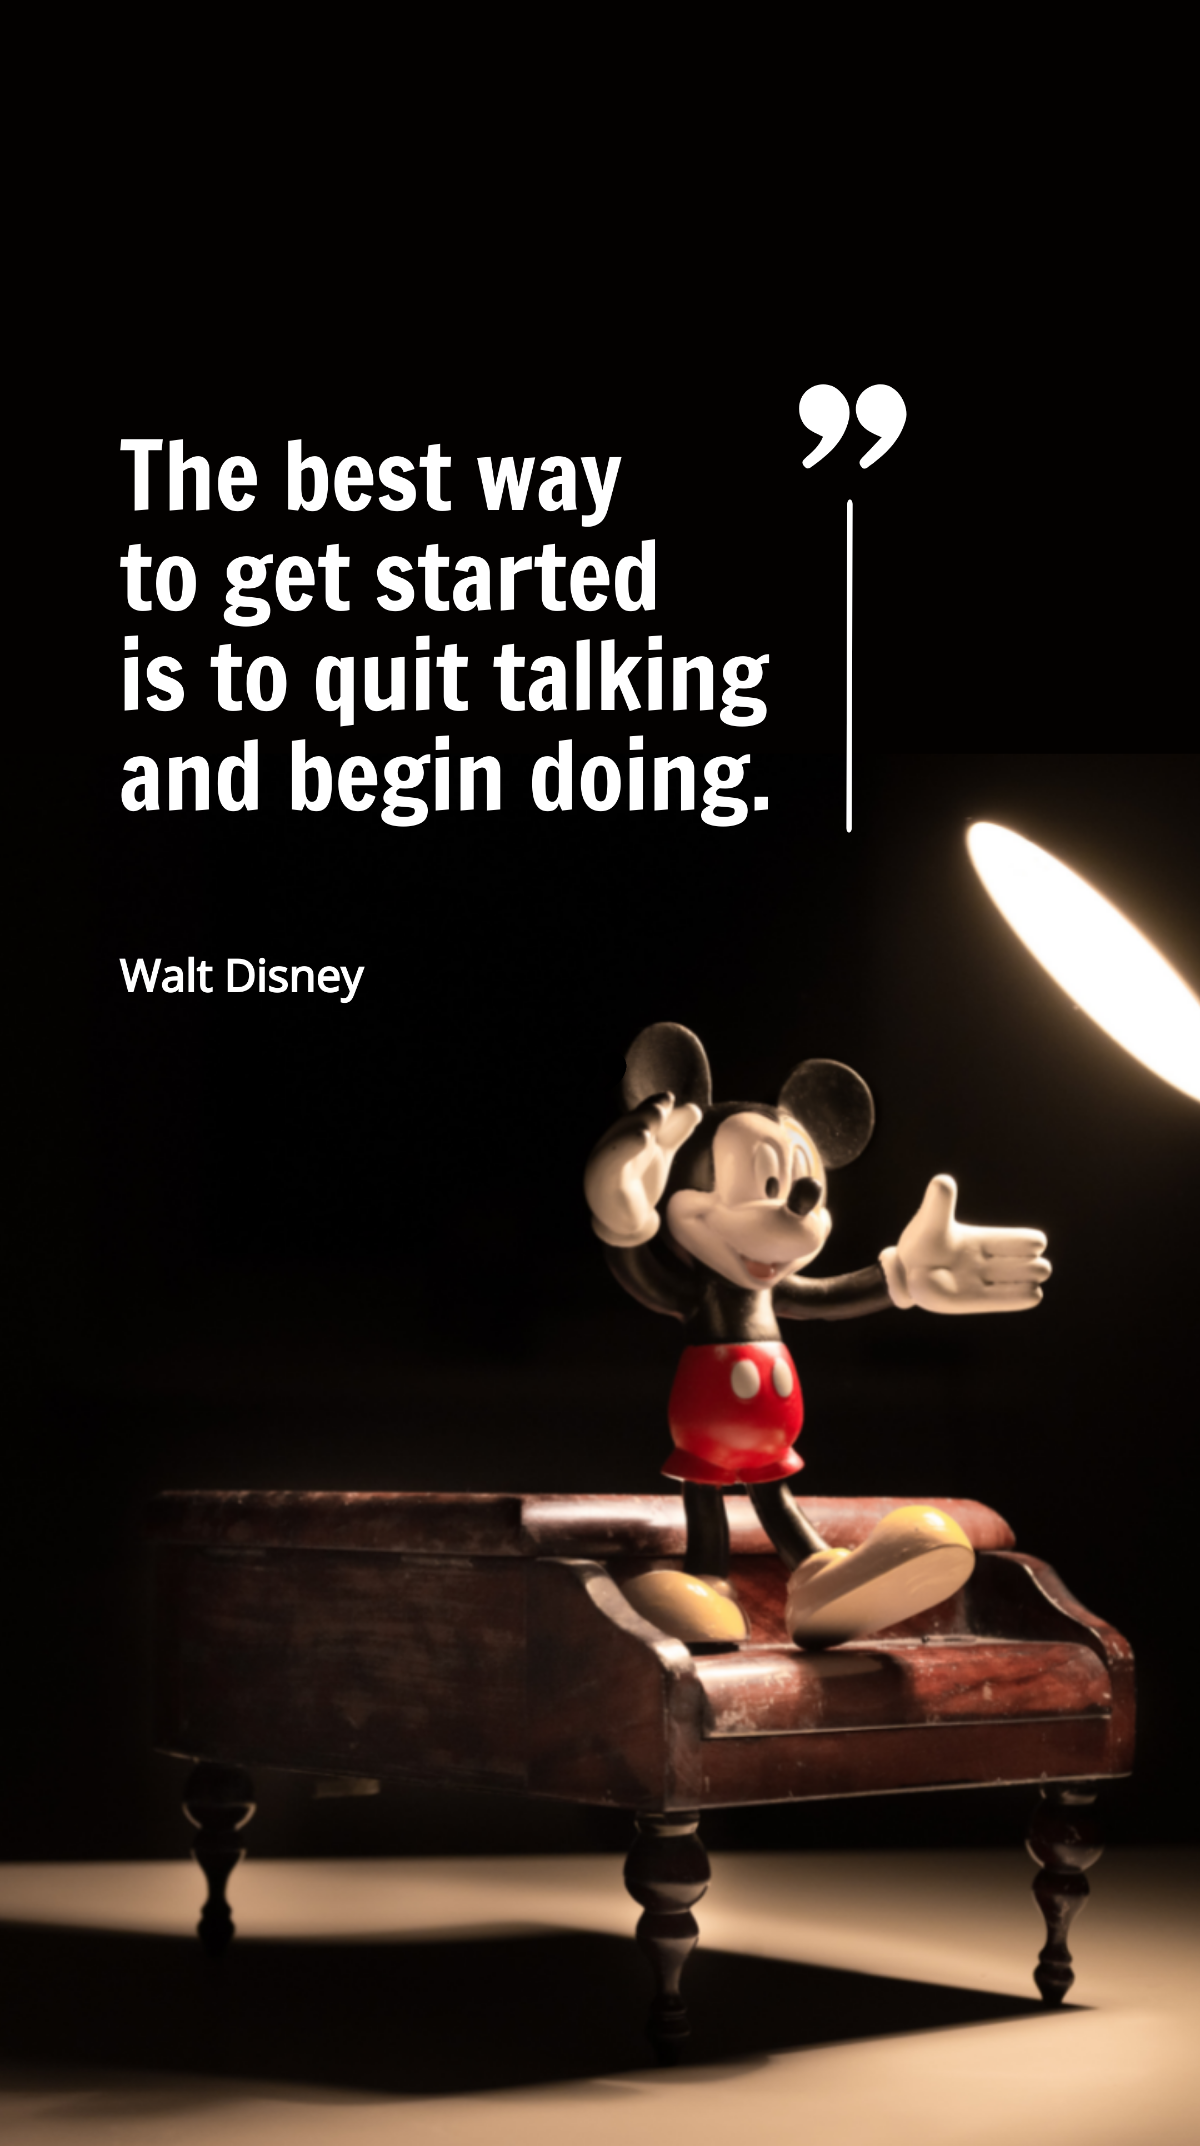 Walt Disney - The best way to get started is to quit talking and begin doing